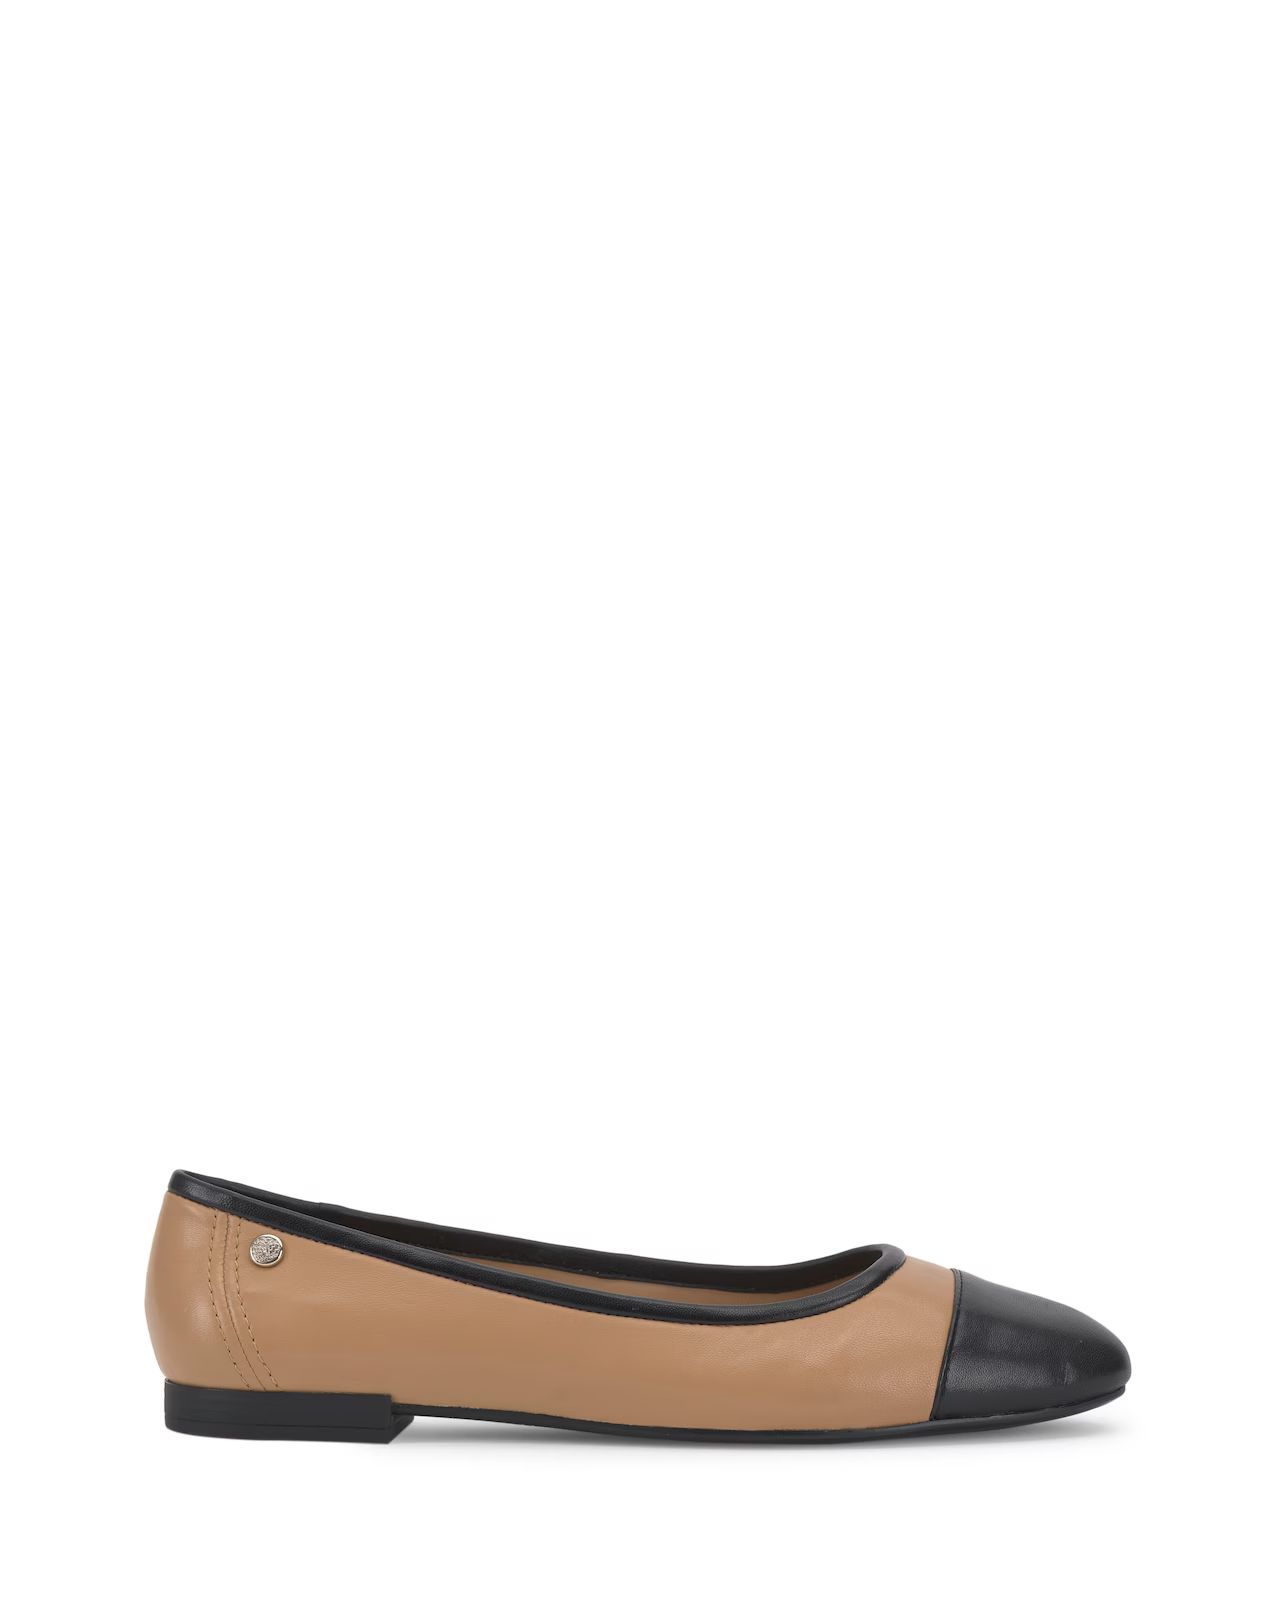 Vince Camuto Minndy Cap Toe Flat | Vince Camuto